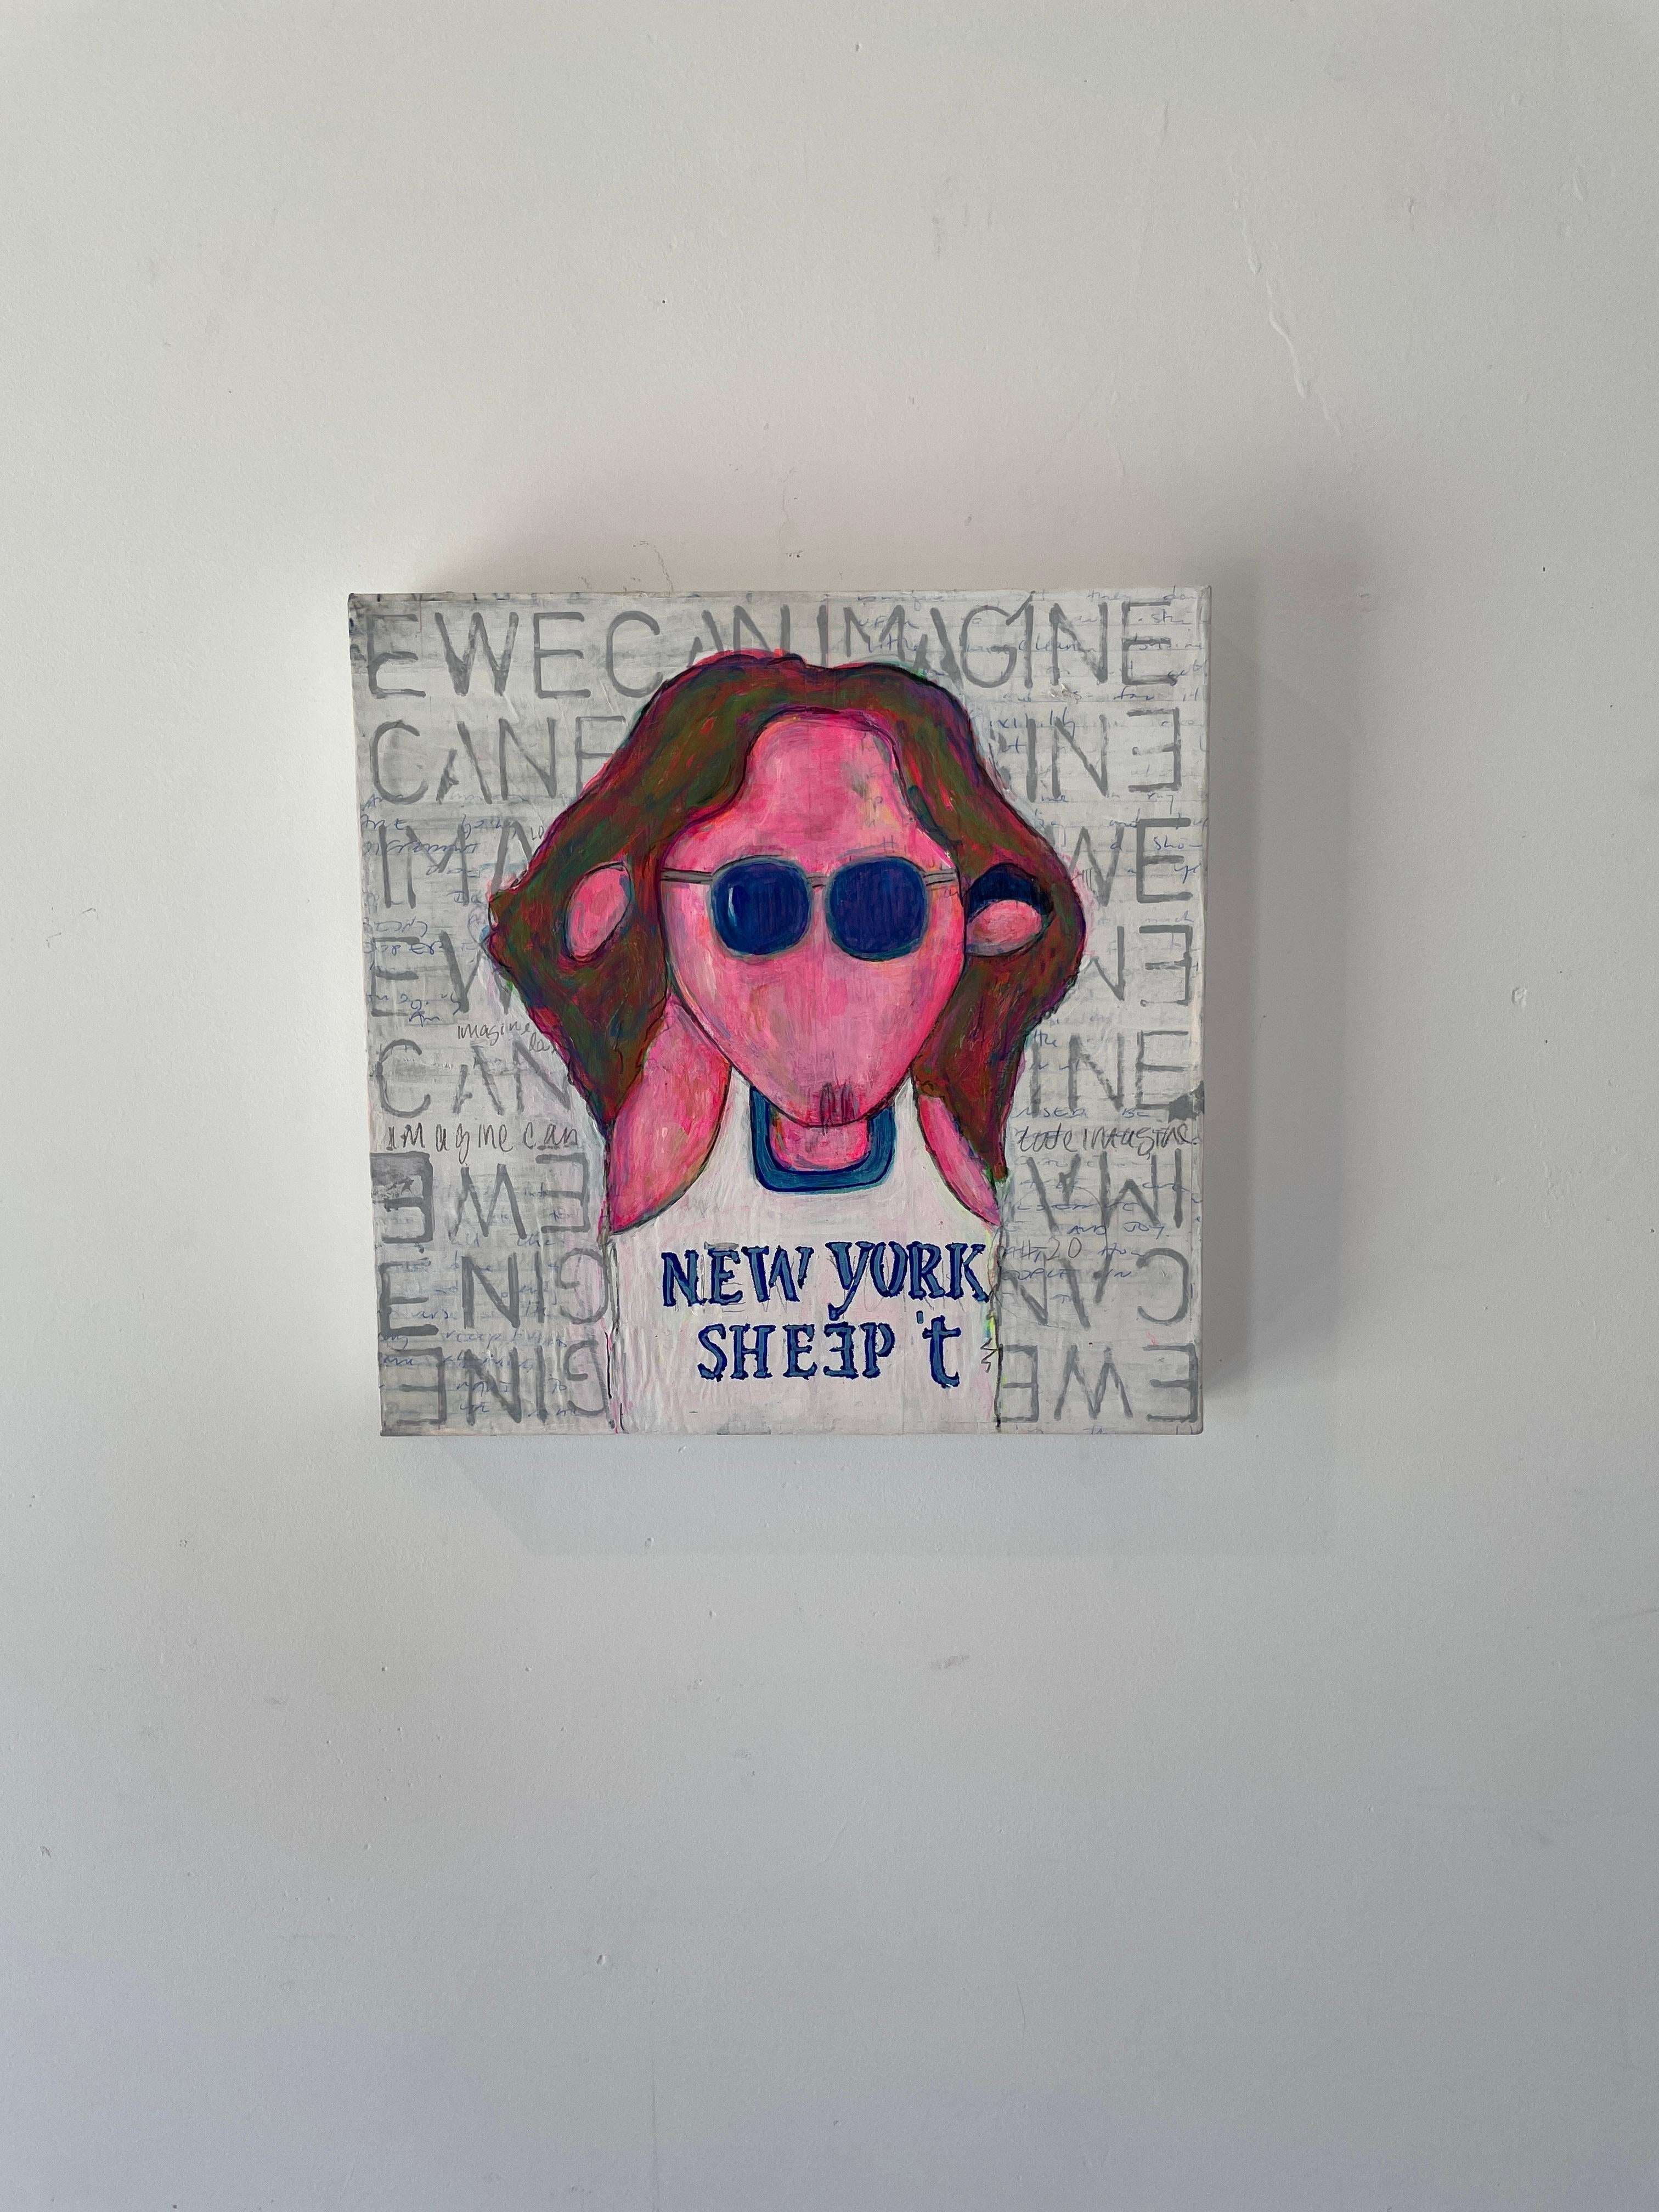 Can Ewe Imagine - mixed media on wood - Pop Art Painting by Little Ricky